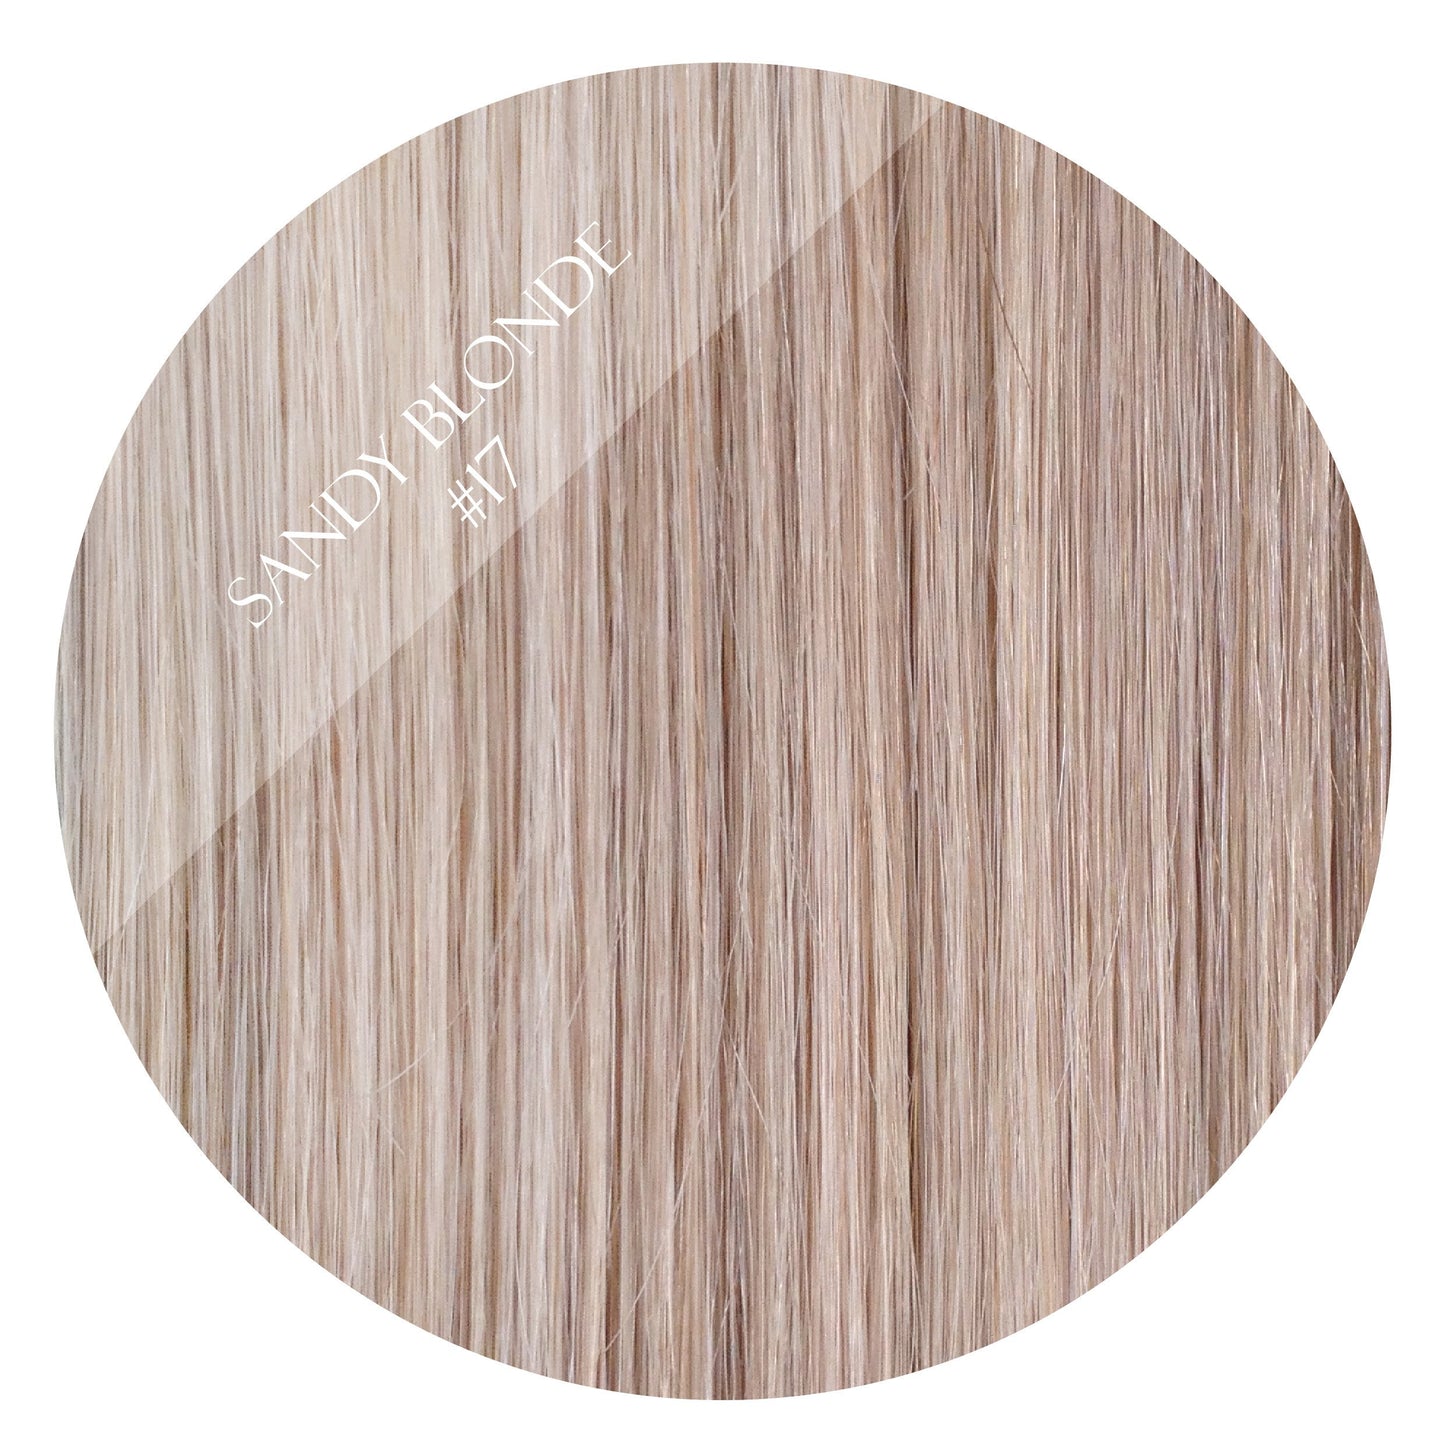 latte blonde #17 halo hair extensions 20inch deluxe